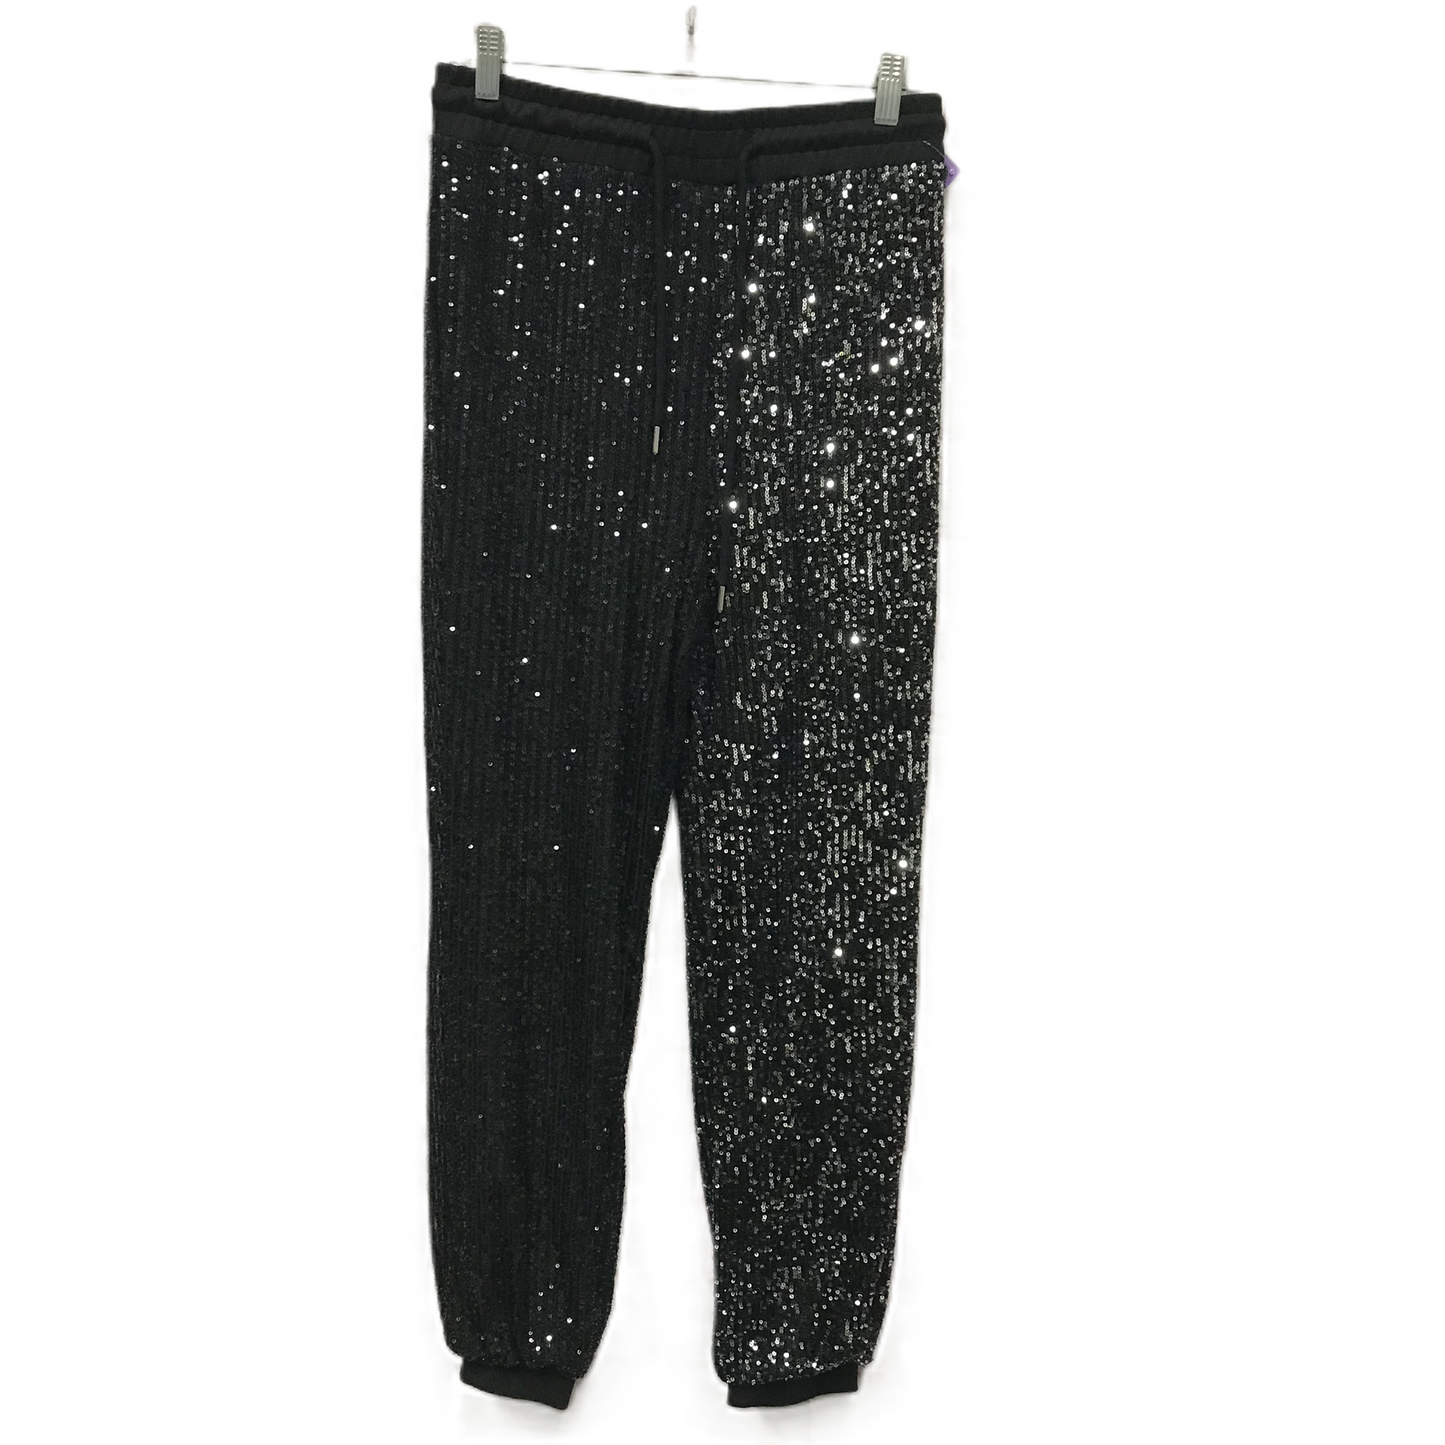 Black & Silver Pants Joggers By dance & marvel, Size: 8